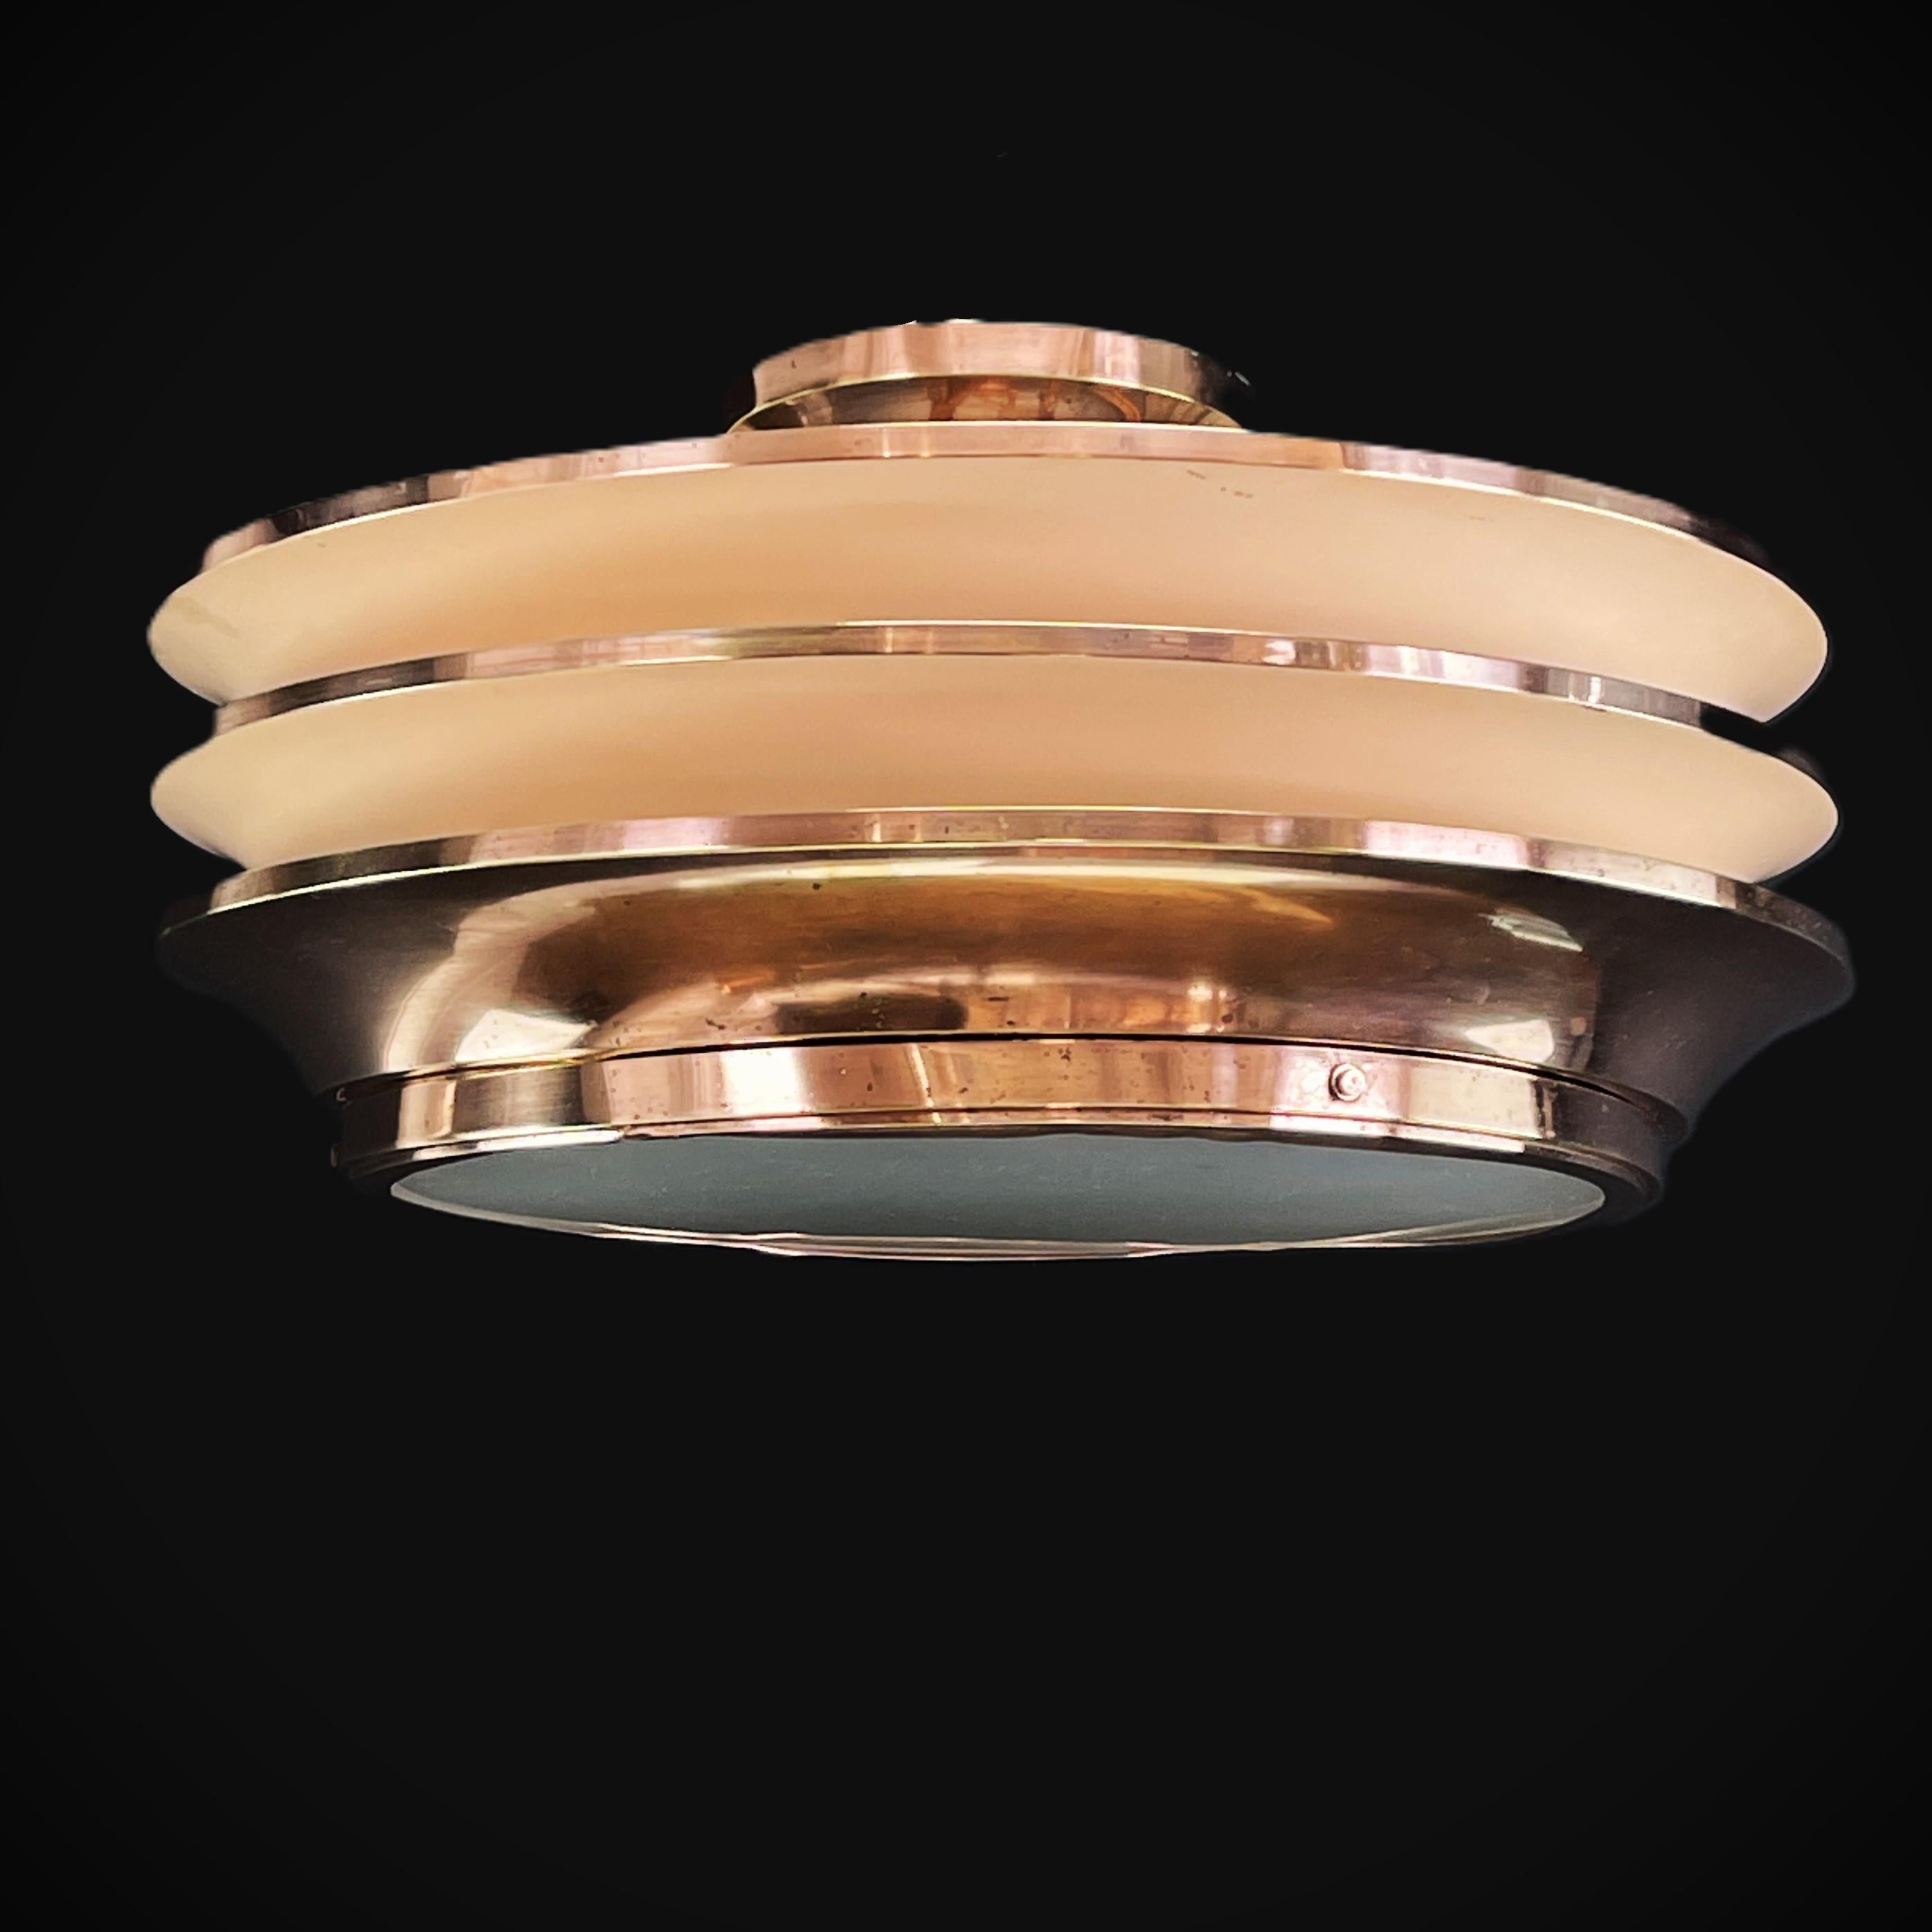 ART DECO hanging lamp design Georges Halais for Eloctra copper, 1930s

The ART DECO ceiling lamp is a remarkable example of the craftsmanship and style of the early 20th century. 

This exclusive masterpiece combines high-quality glass and